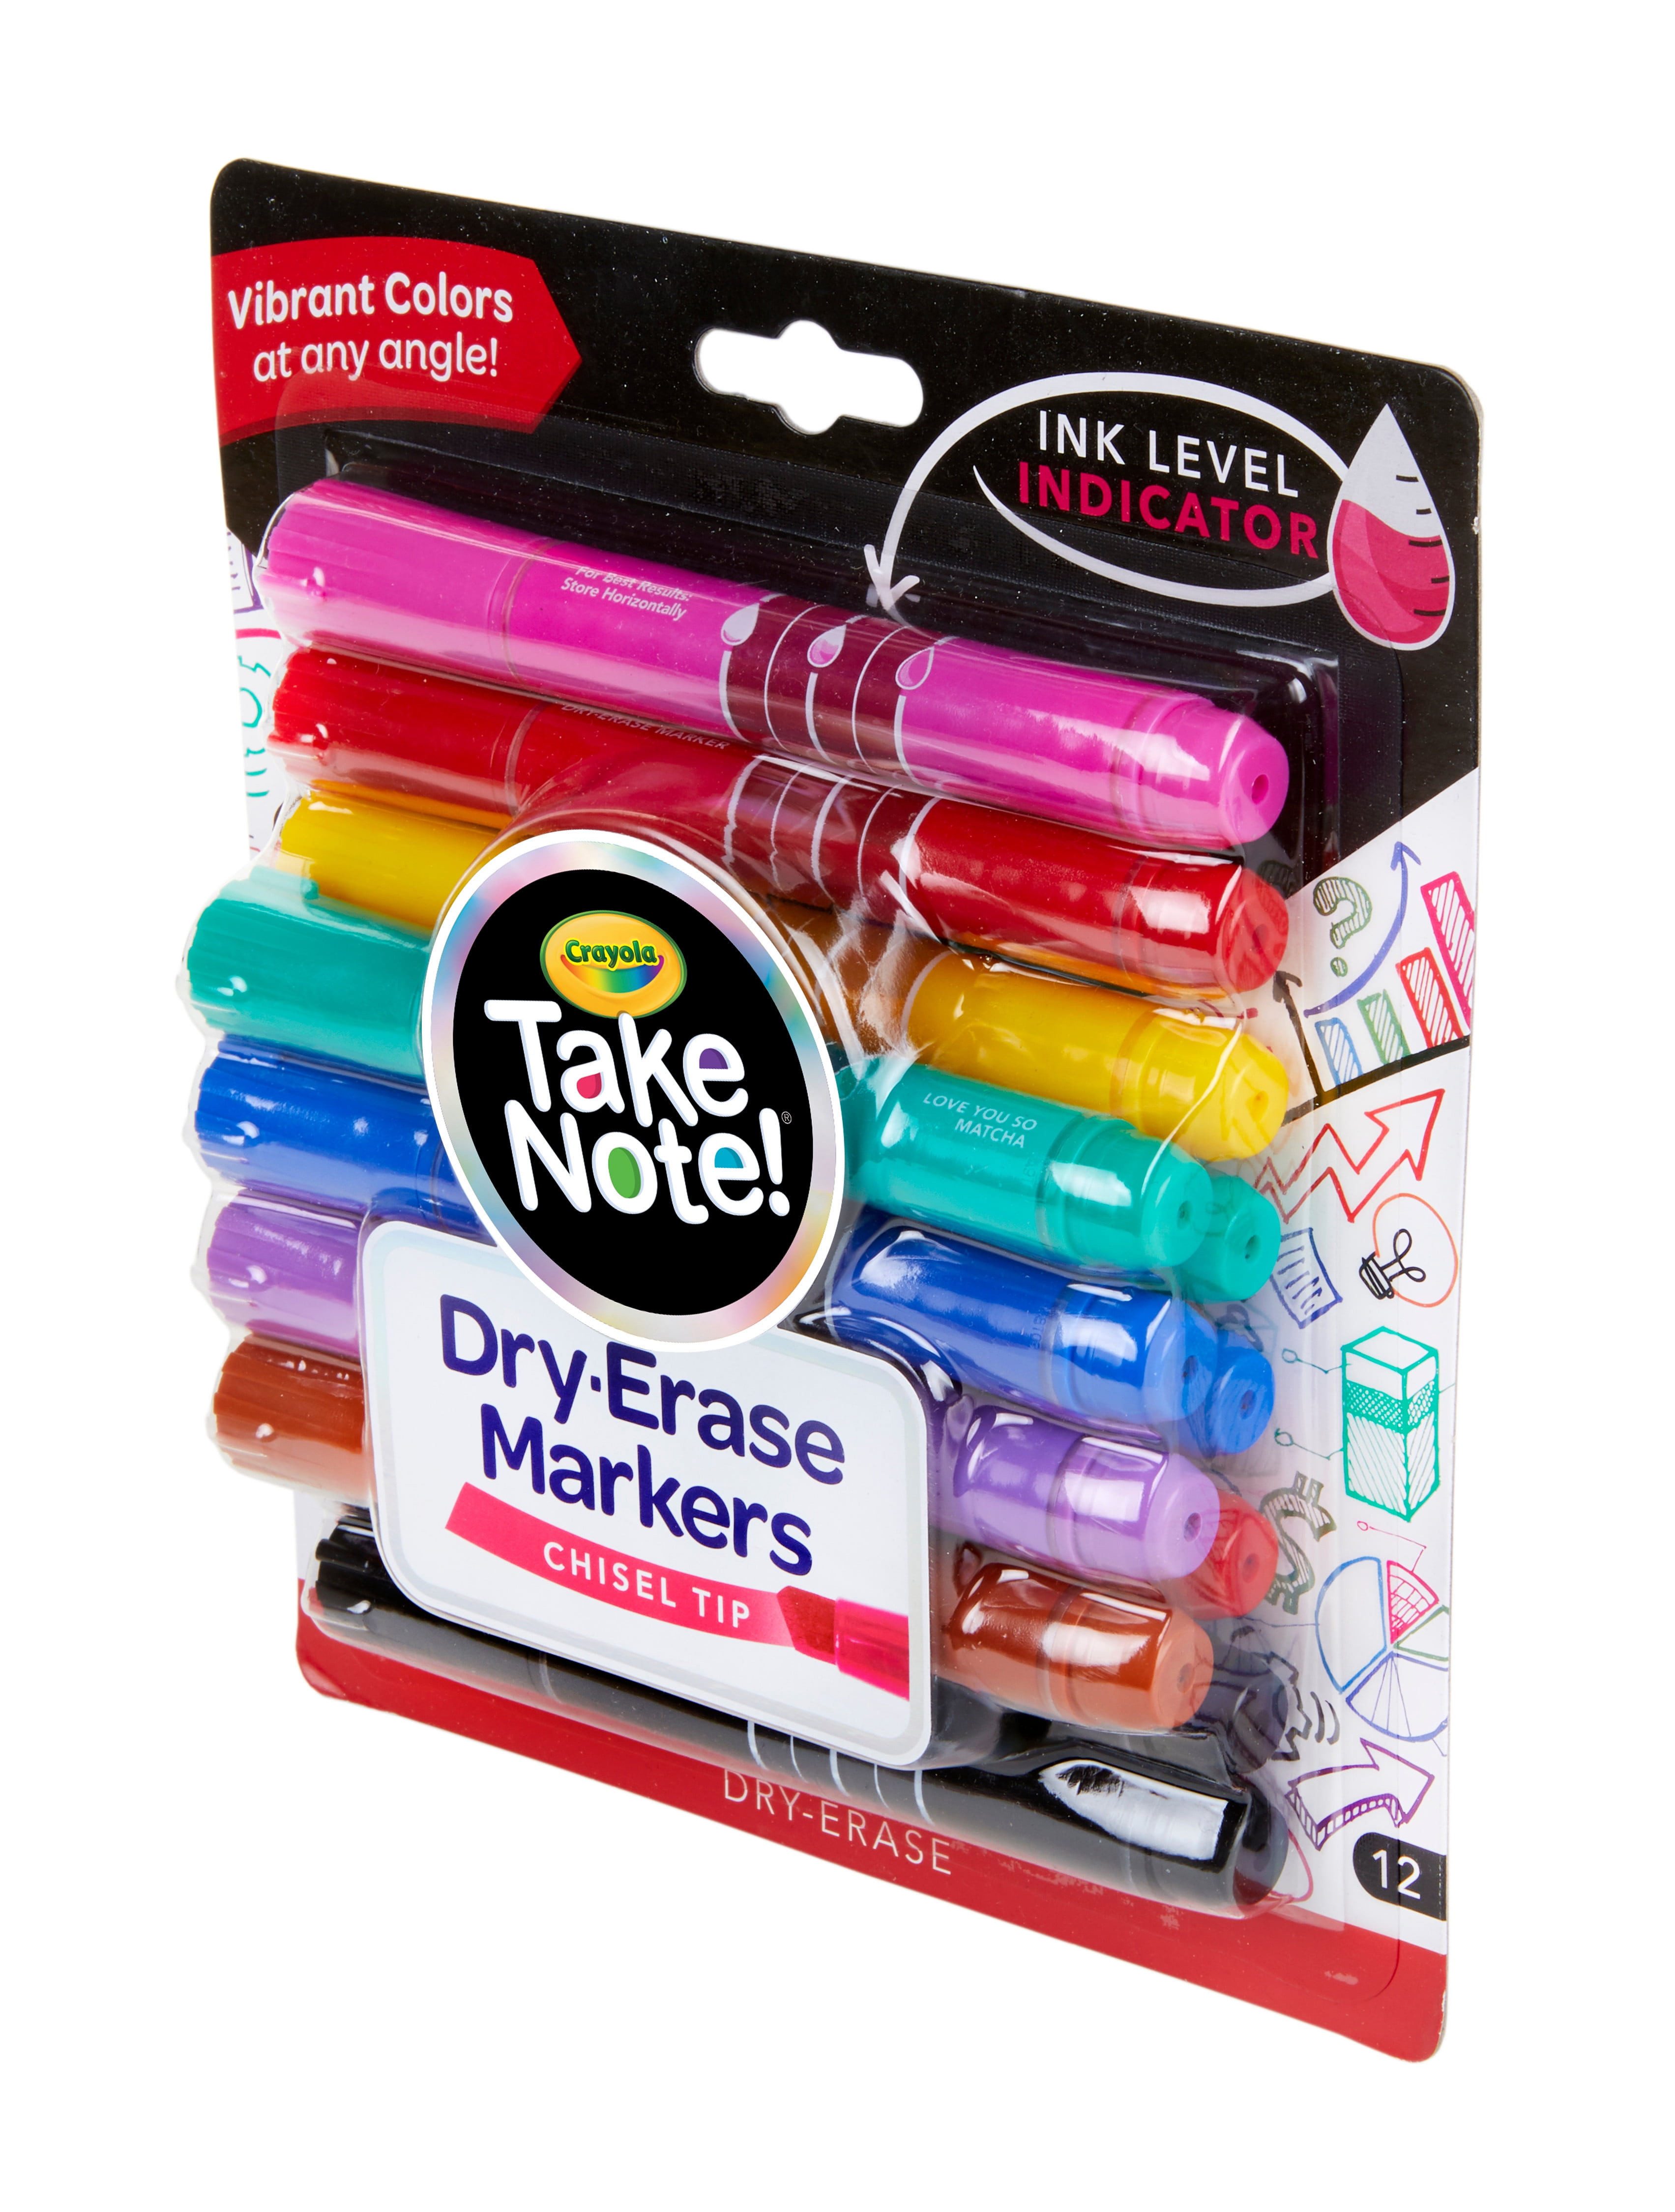 55% Off Crayola Take Note Dry Erase Markers 12 Count